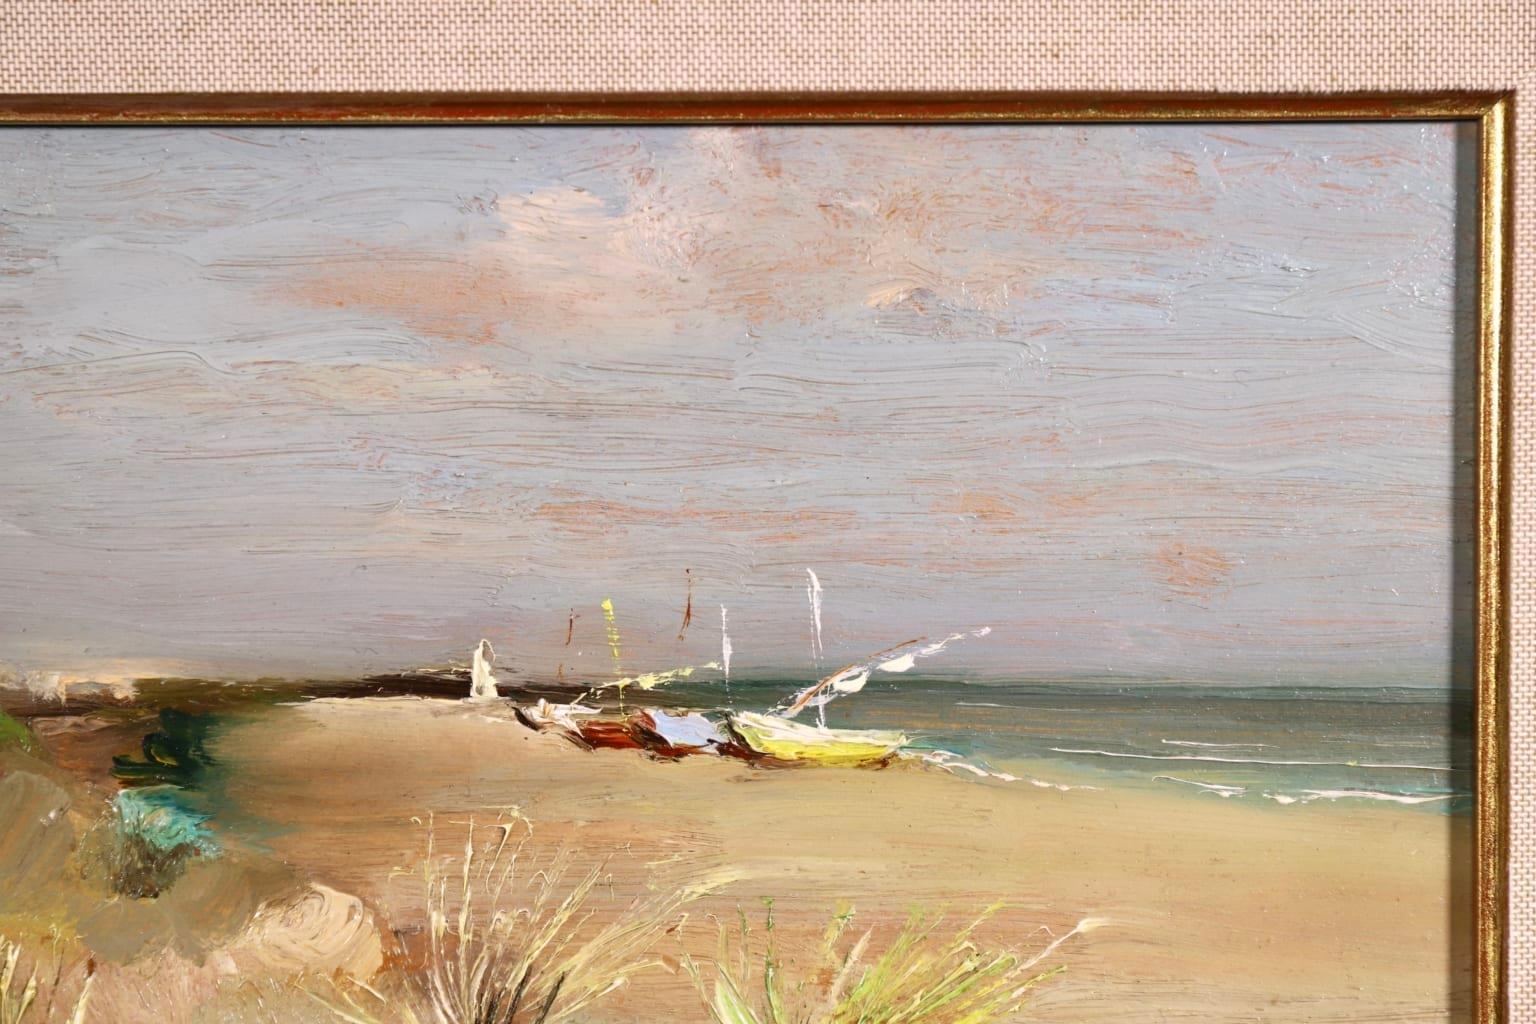 Sand Dunes at the Beach - Post Impressionist Oil, Sea Landscape by Marcel Dyf 2